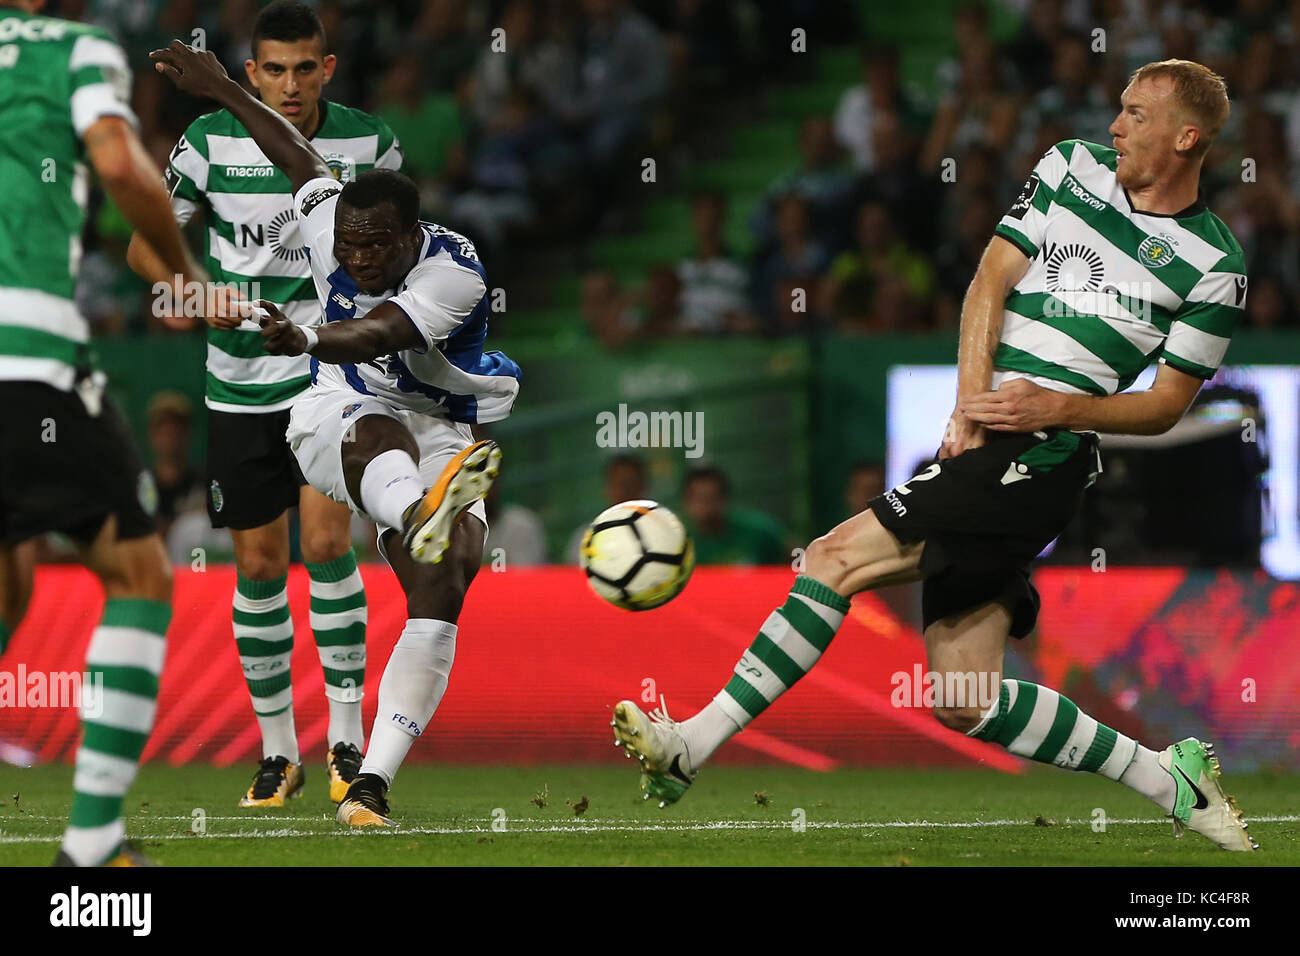 Lisbon, Portugal. 01st Oct, 2017. FC PortoÕs forward Vincent Aboubakar from Cameroon (C) during Premier League 2017/18 match between Sporting CP and FC Porto, at Alvalade Stadium in Lisbon on October 1, 2017. (Photo by Bruno Barros / DPI) Credit: Bruno Barros/Alamy Live News Stock Photo